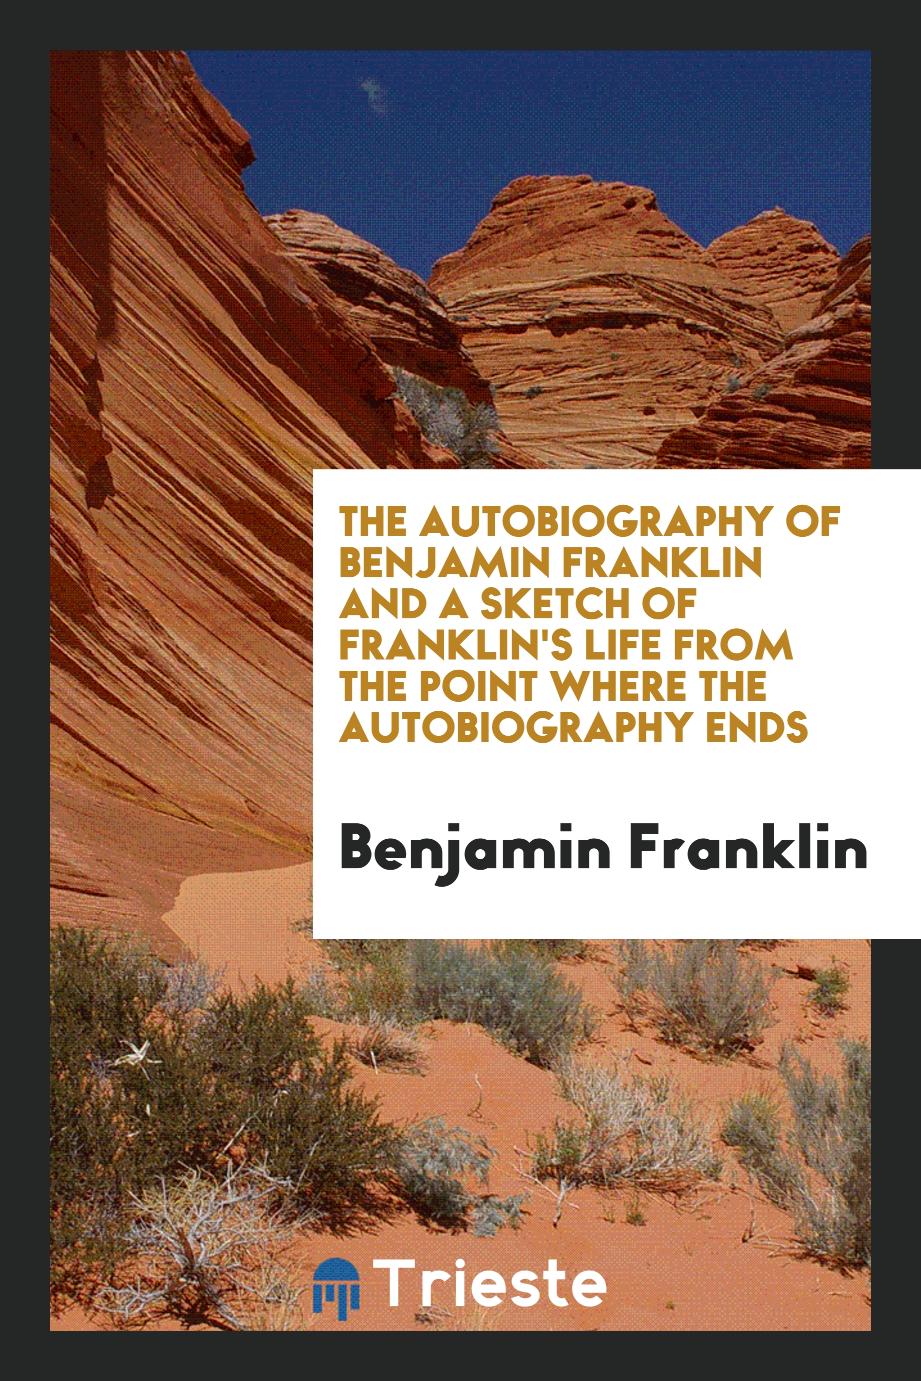 The autobiography of Benjamin Franklin and a sketch of Franklin's life from the point where the autobiography ends